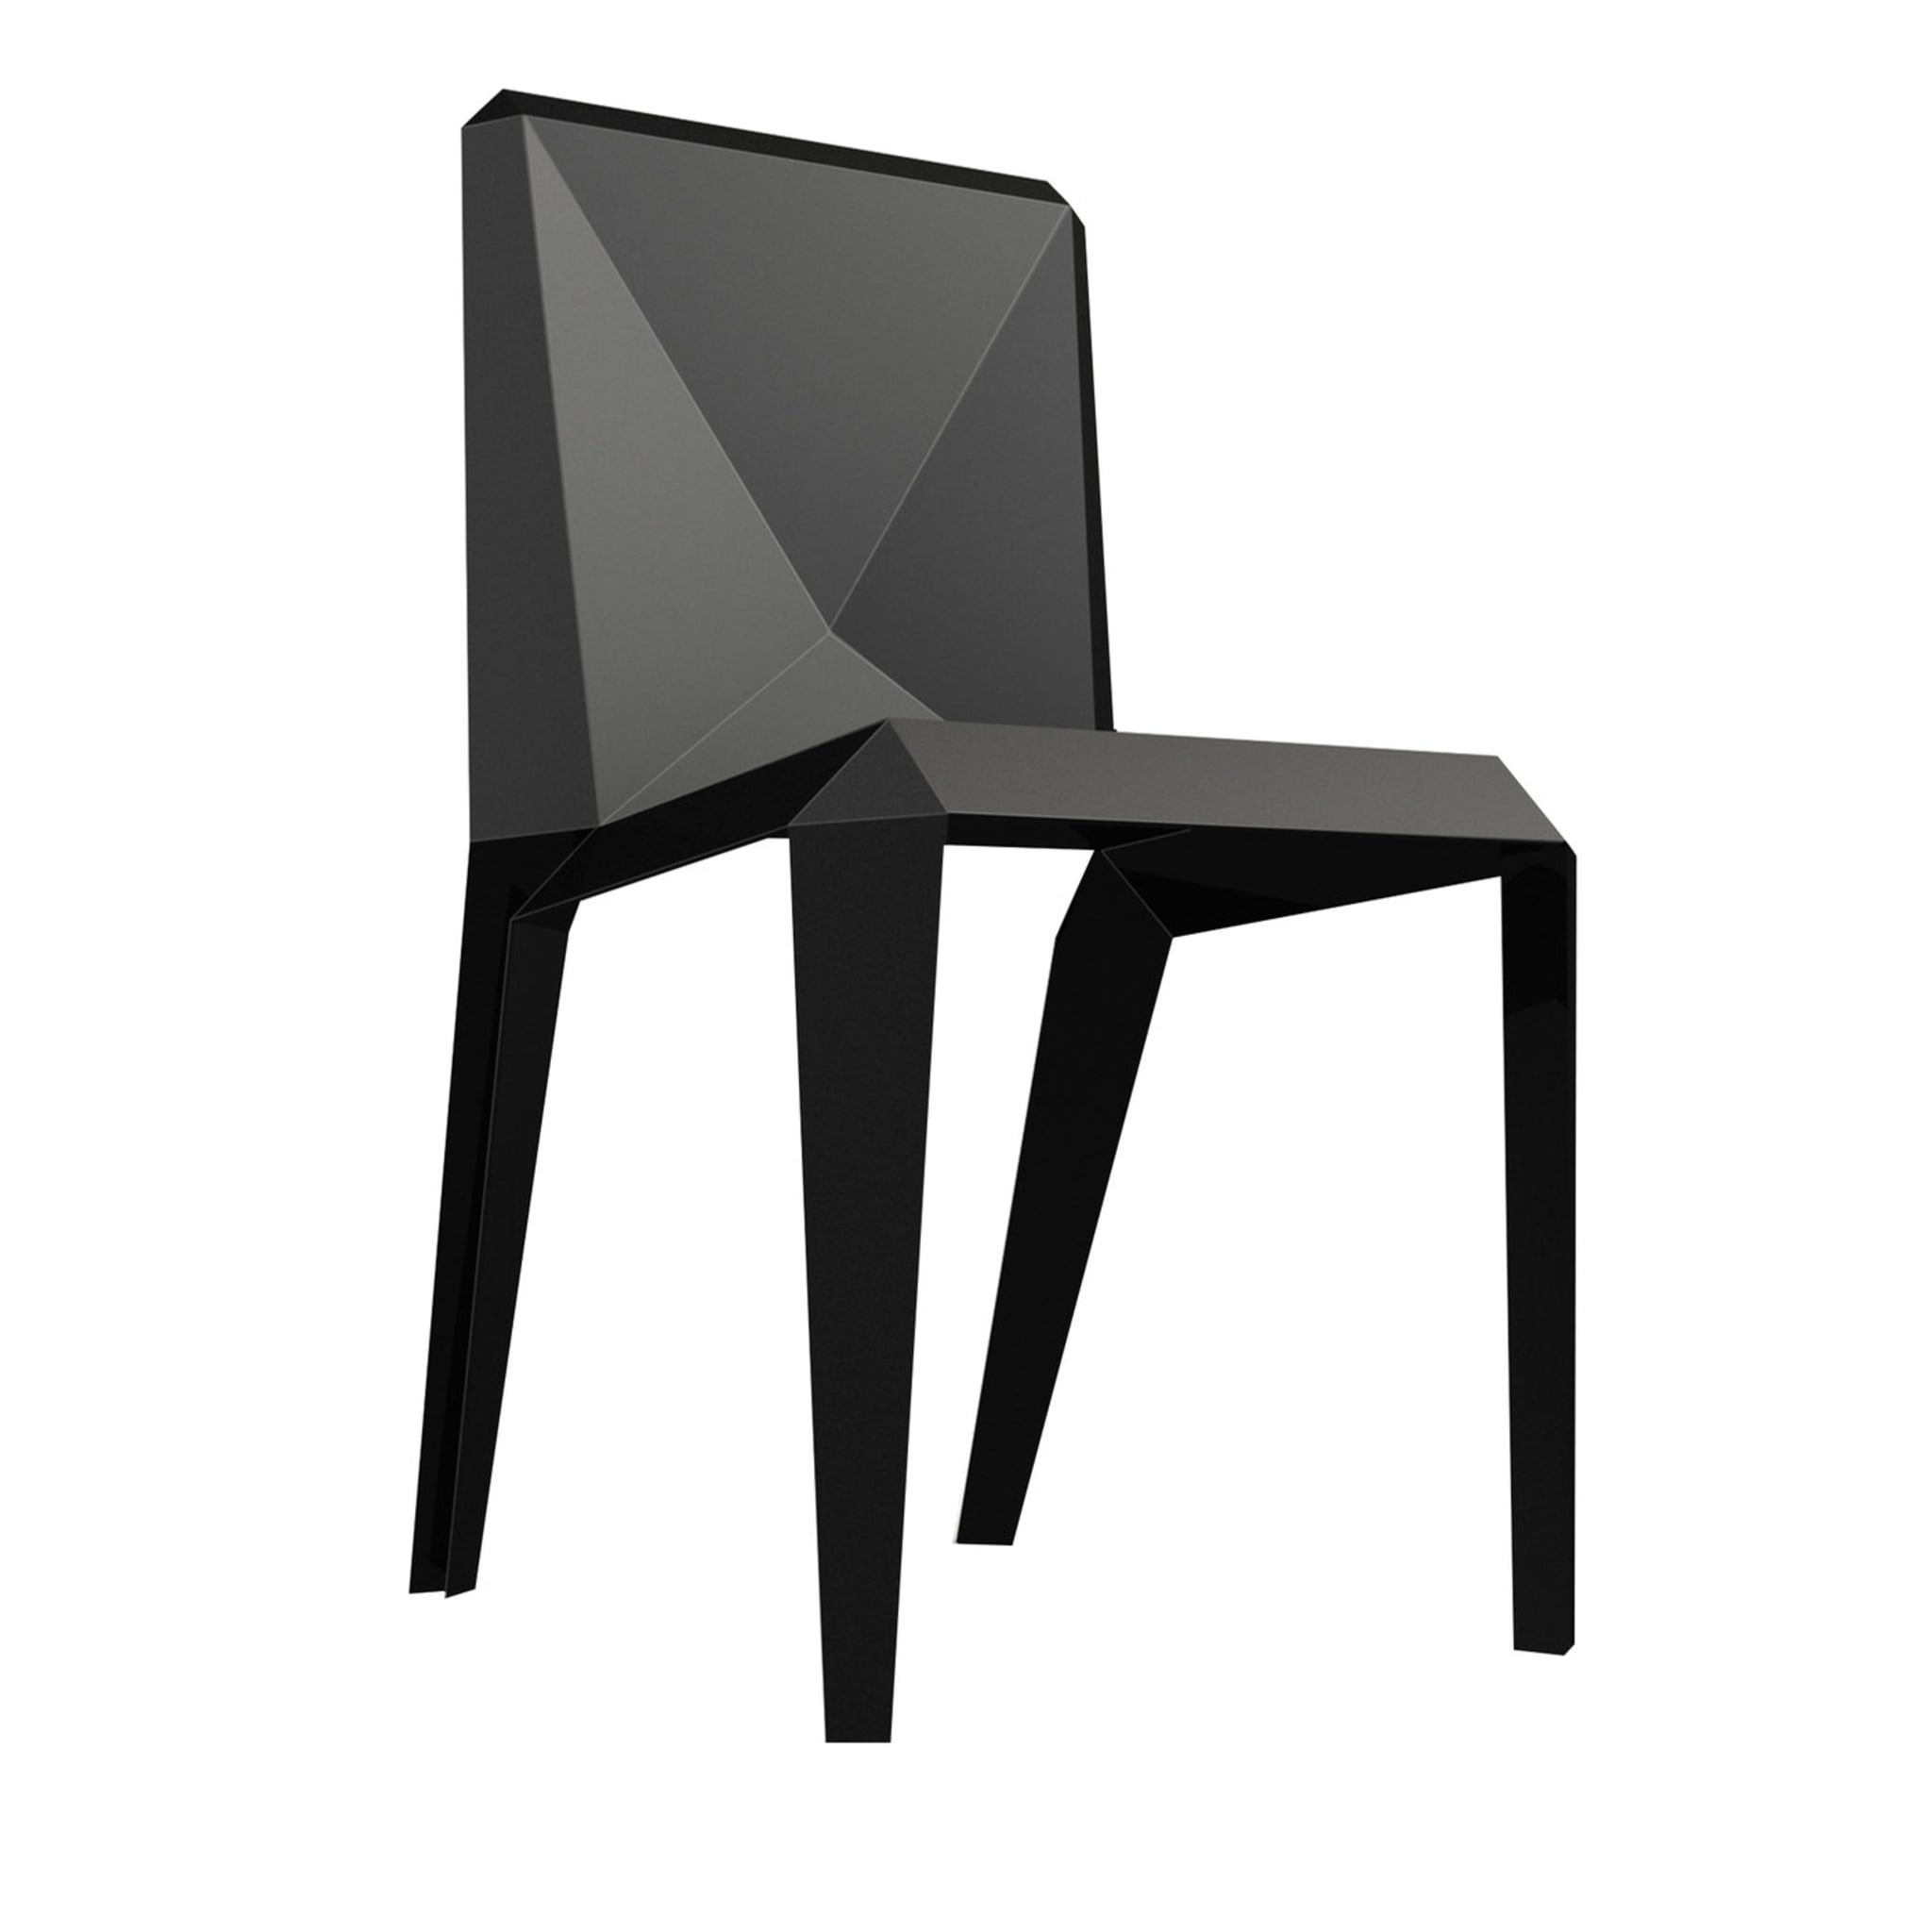 Lingotto Black Chair by Garilab by Piter Perbellini - Main view